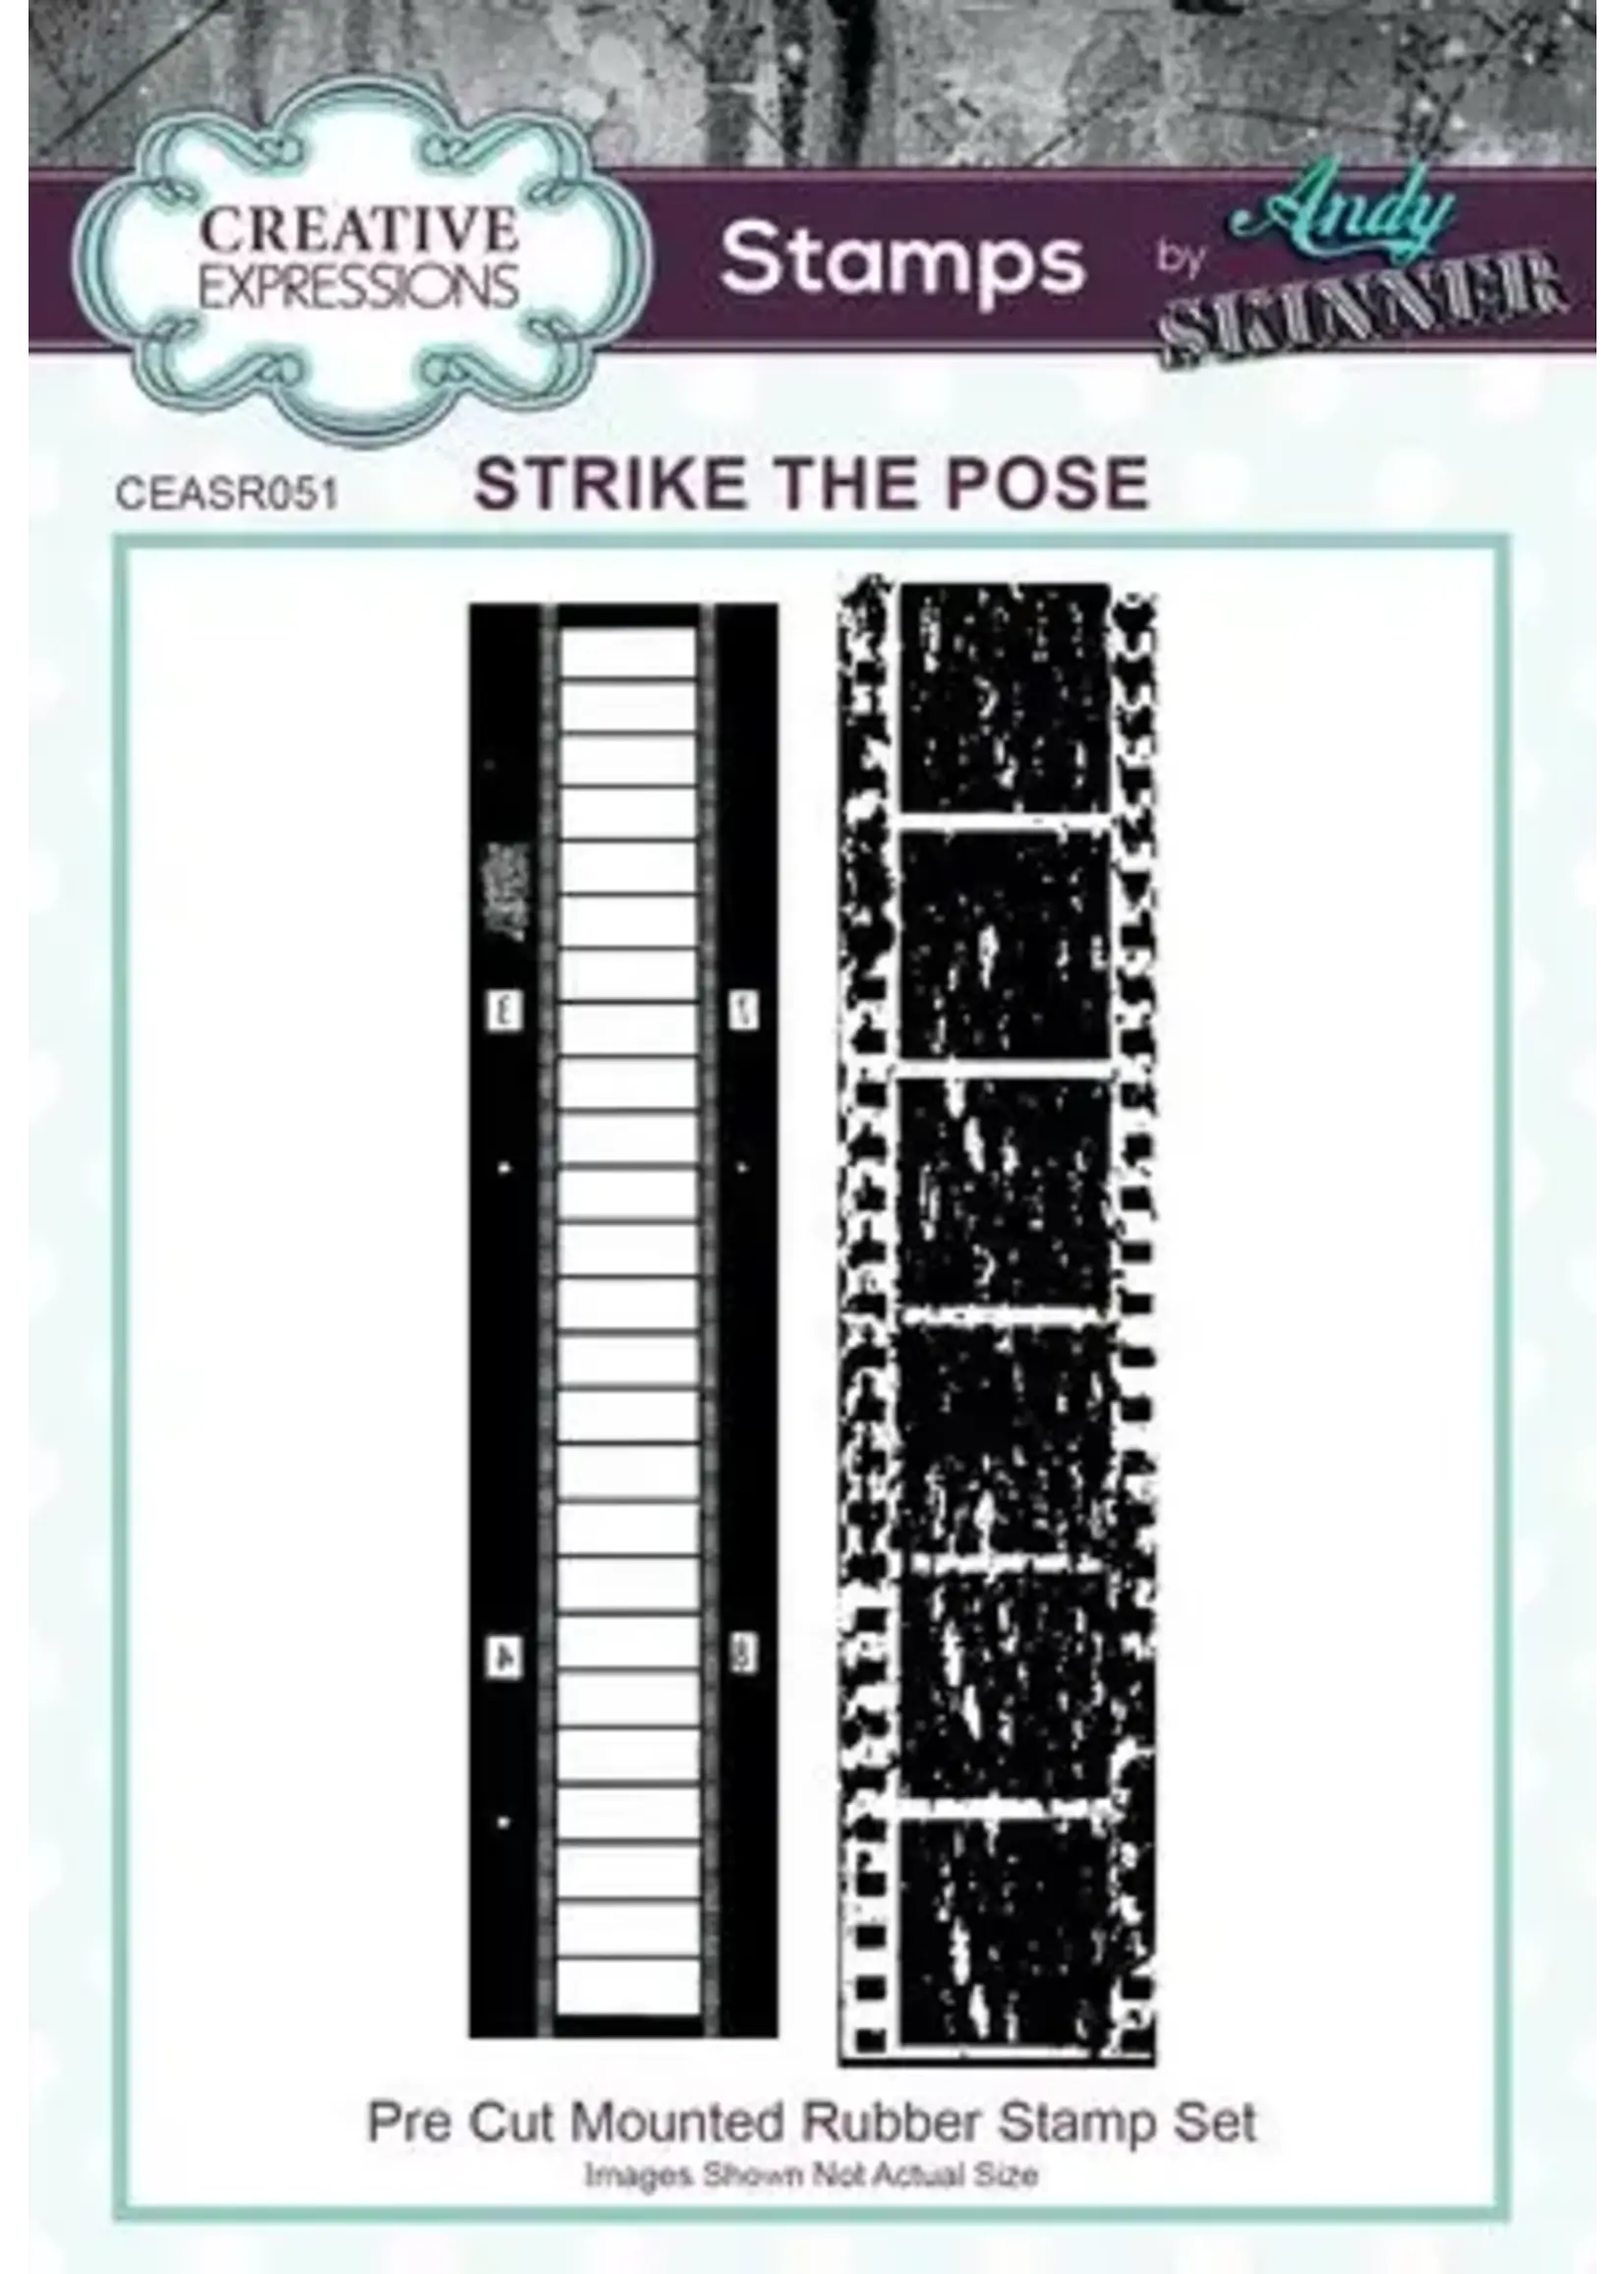 creative expressions Andy Skinner Rubber Stamp A6 Strike The Pose (CEASR051)